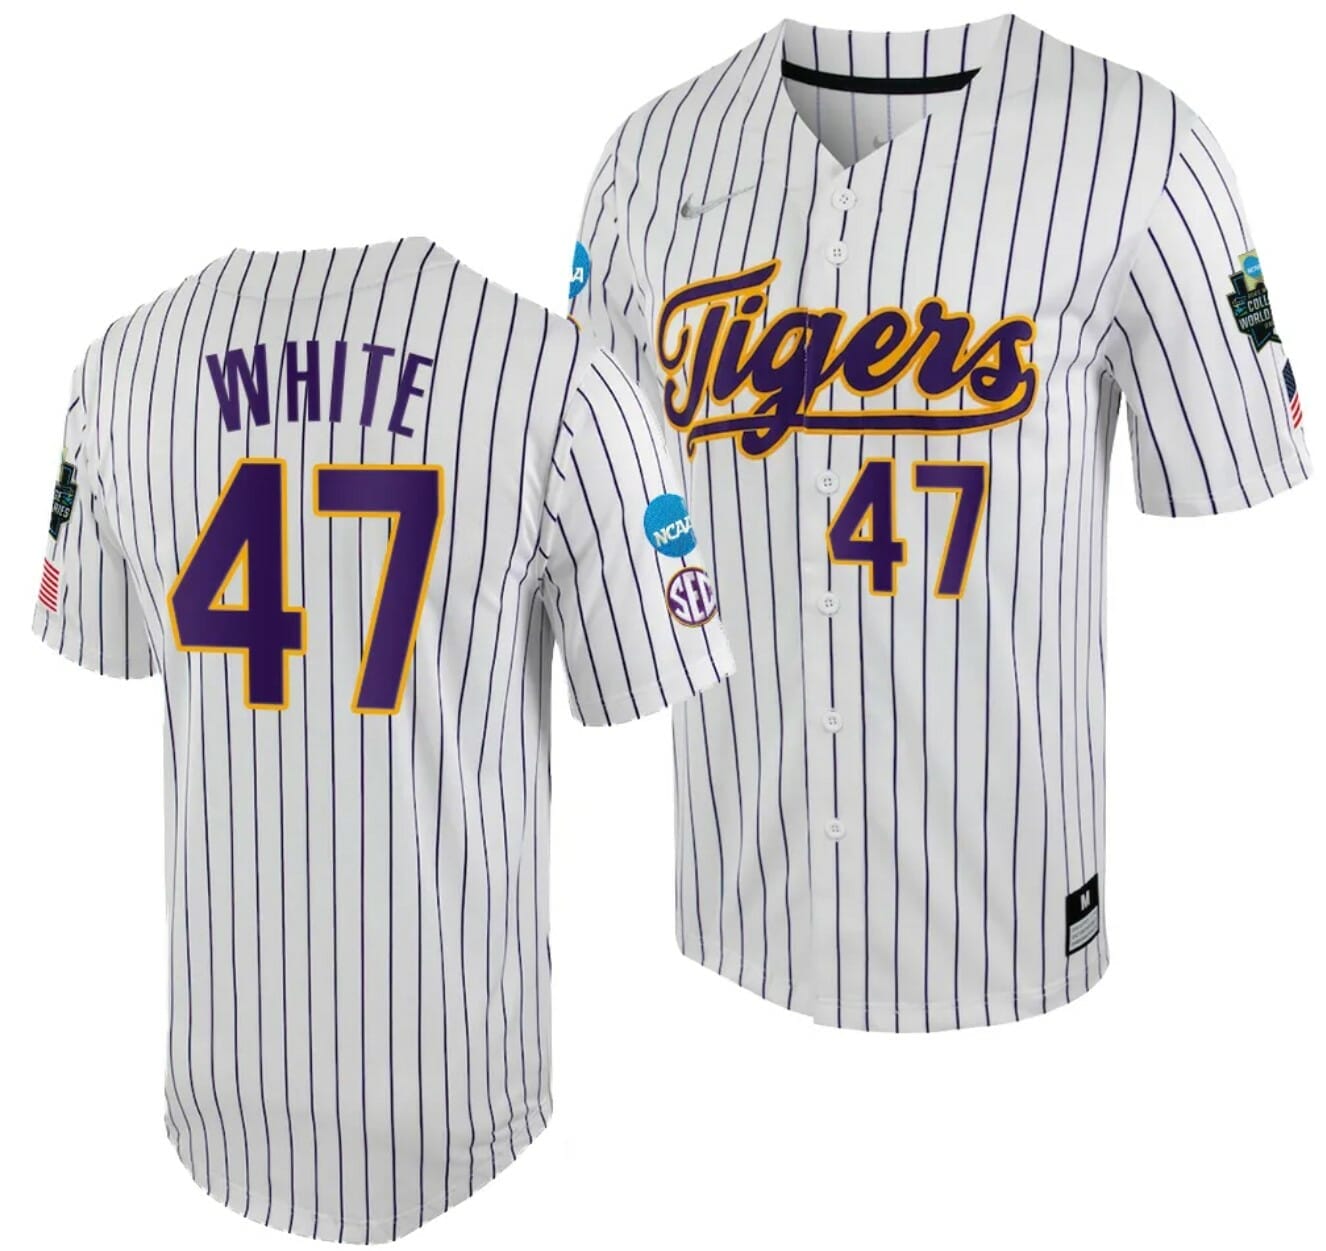 Trending] New Tommy White Jersey LSU Tigers Gold WS 2023